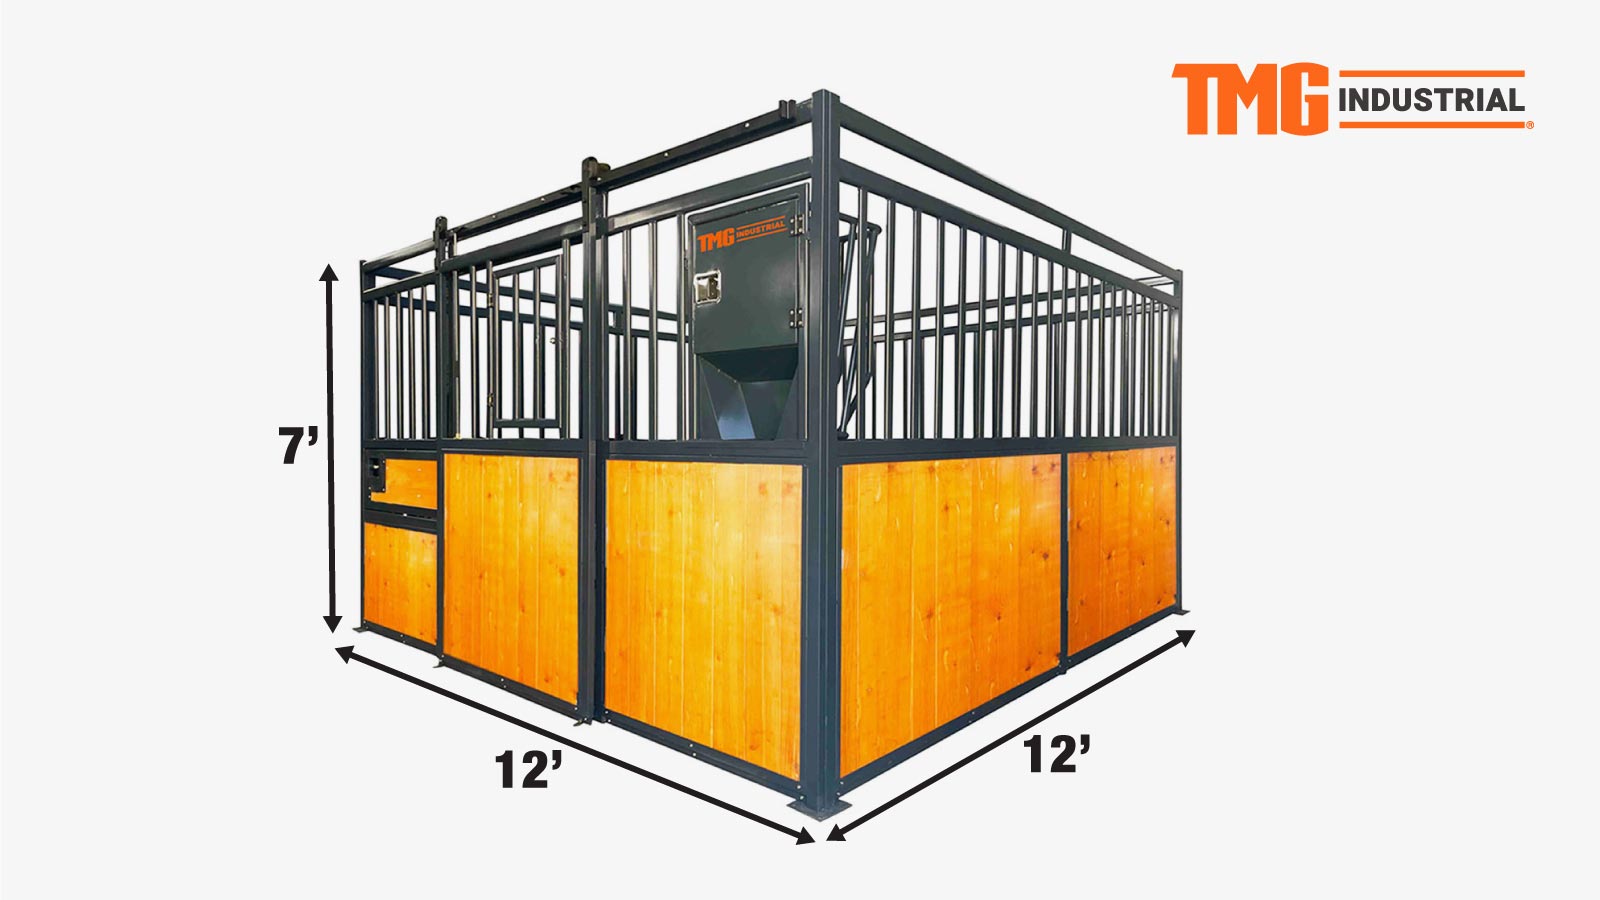 TMG Industrial 12' x 12' Horse Stall Set w/Pine Lumber Boards, Vertical Bar Top & Wood-Filled Bottom, Window/Feeder Opening, Front Sliding Door, TMG-FHS12-specifications-image